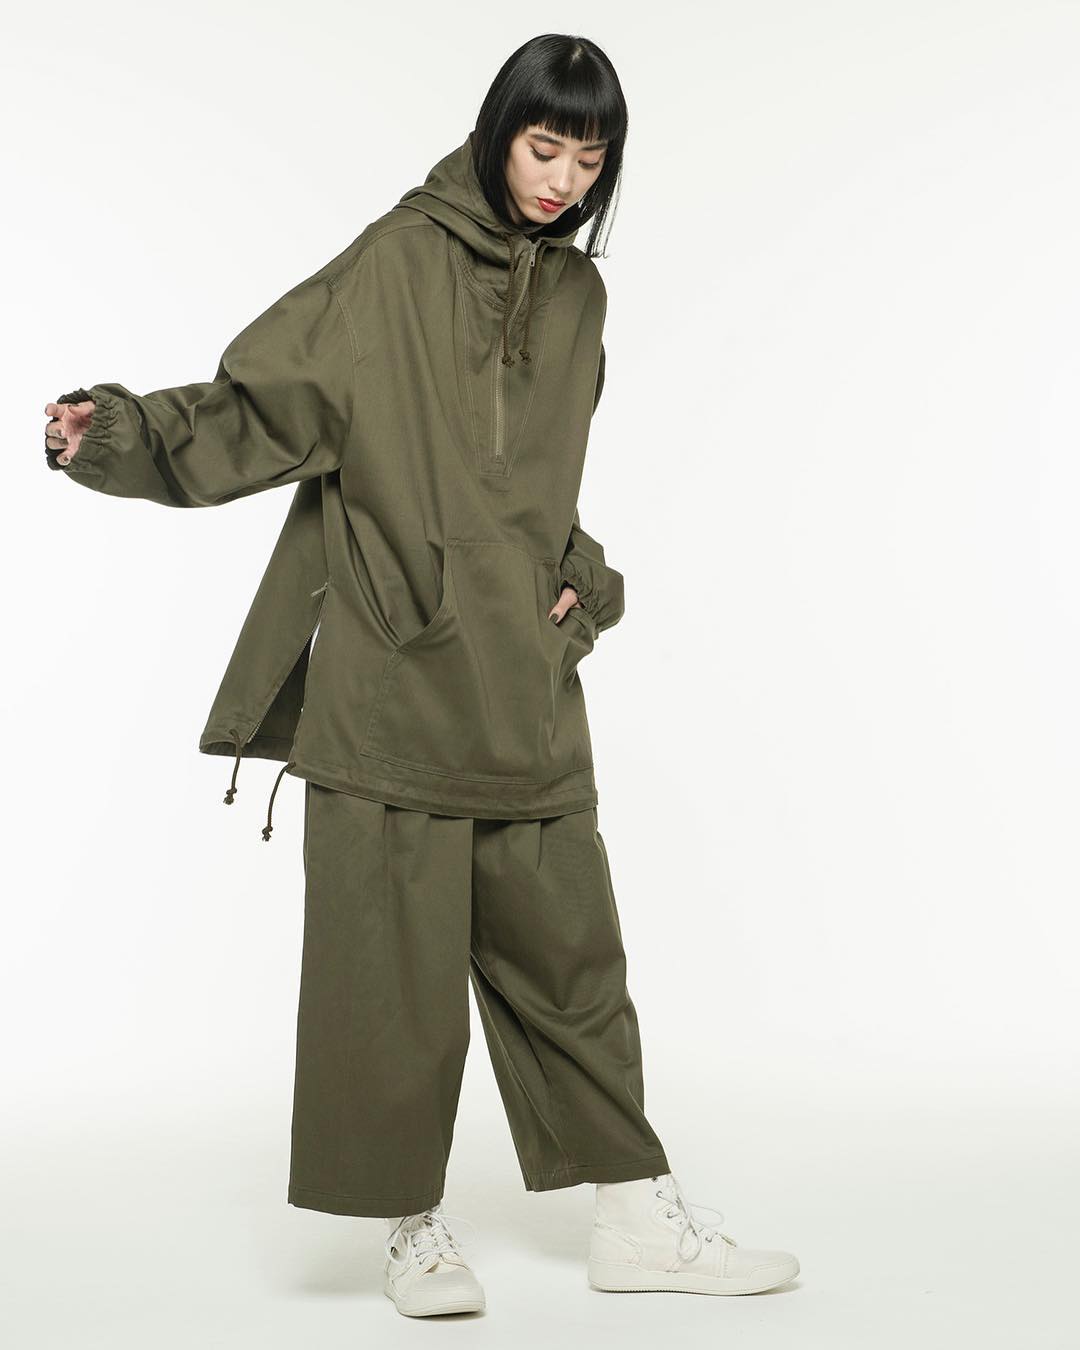 S'YTE presents a collection of oversized, unisex garments — eye_C